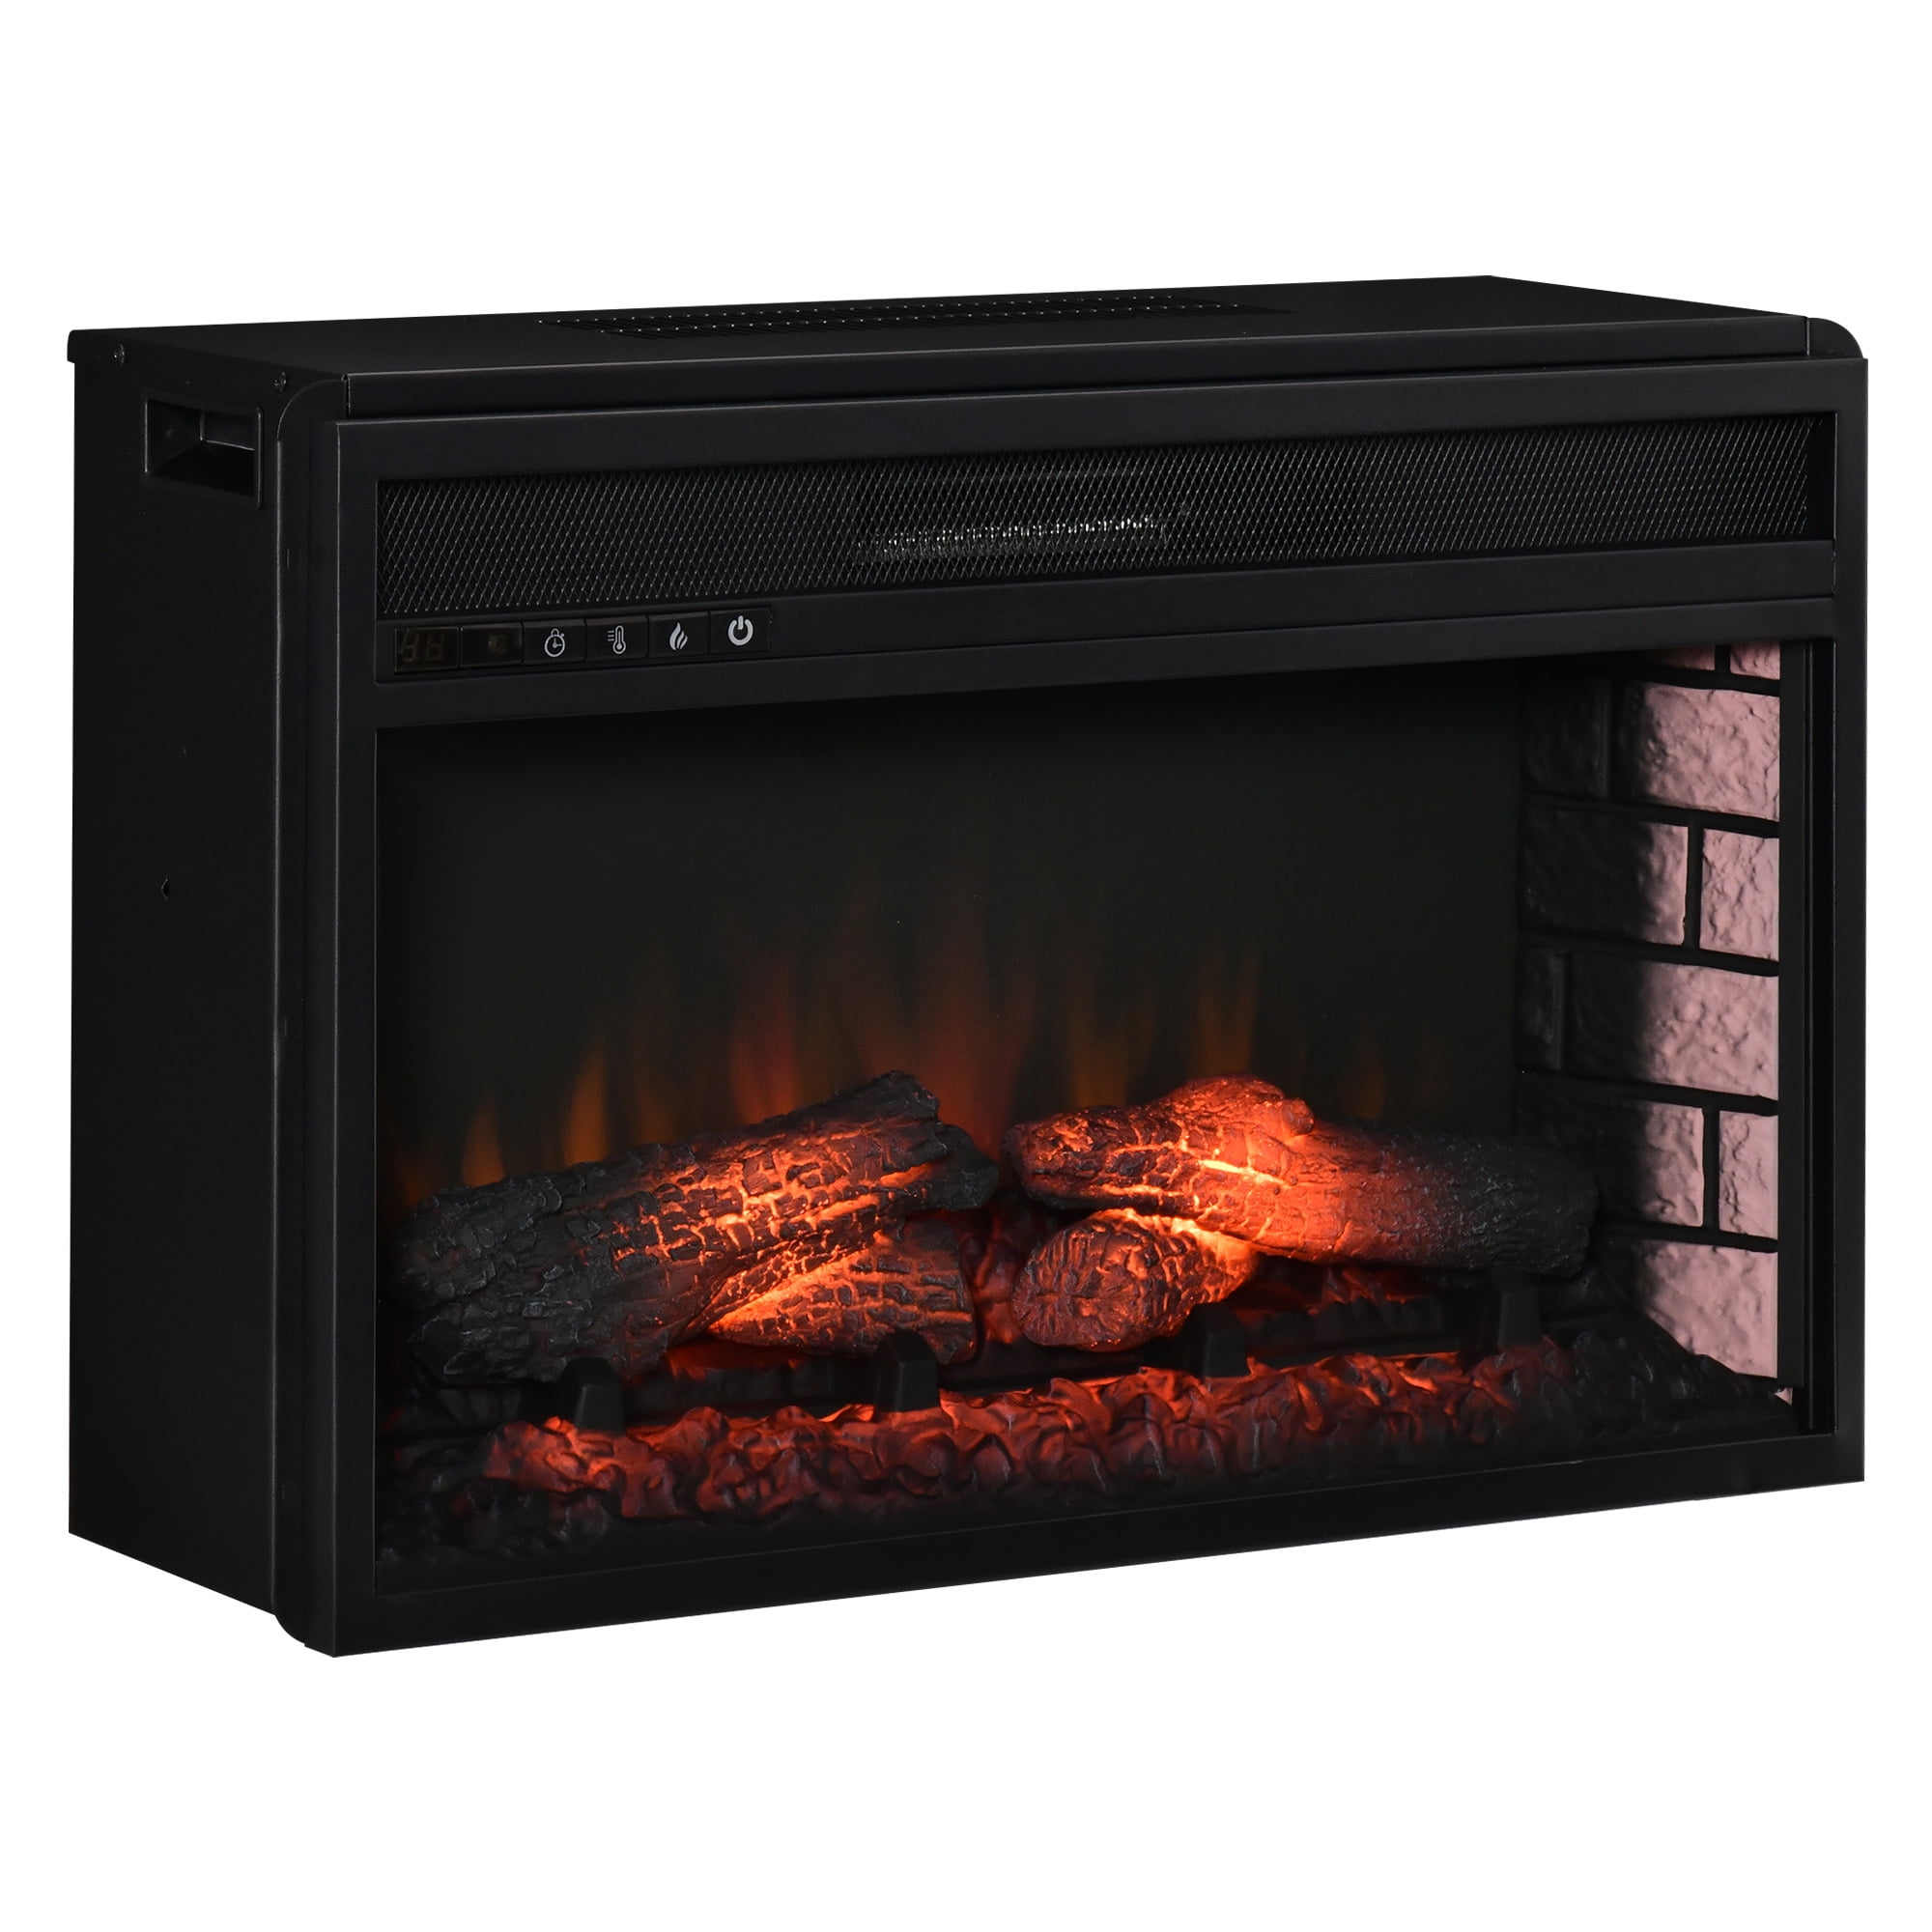 BELLEZE 18 Embedded Electric Fireplace Insert Remote Heater Glass View Adjustable Log Flame 1400W Black